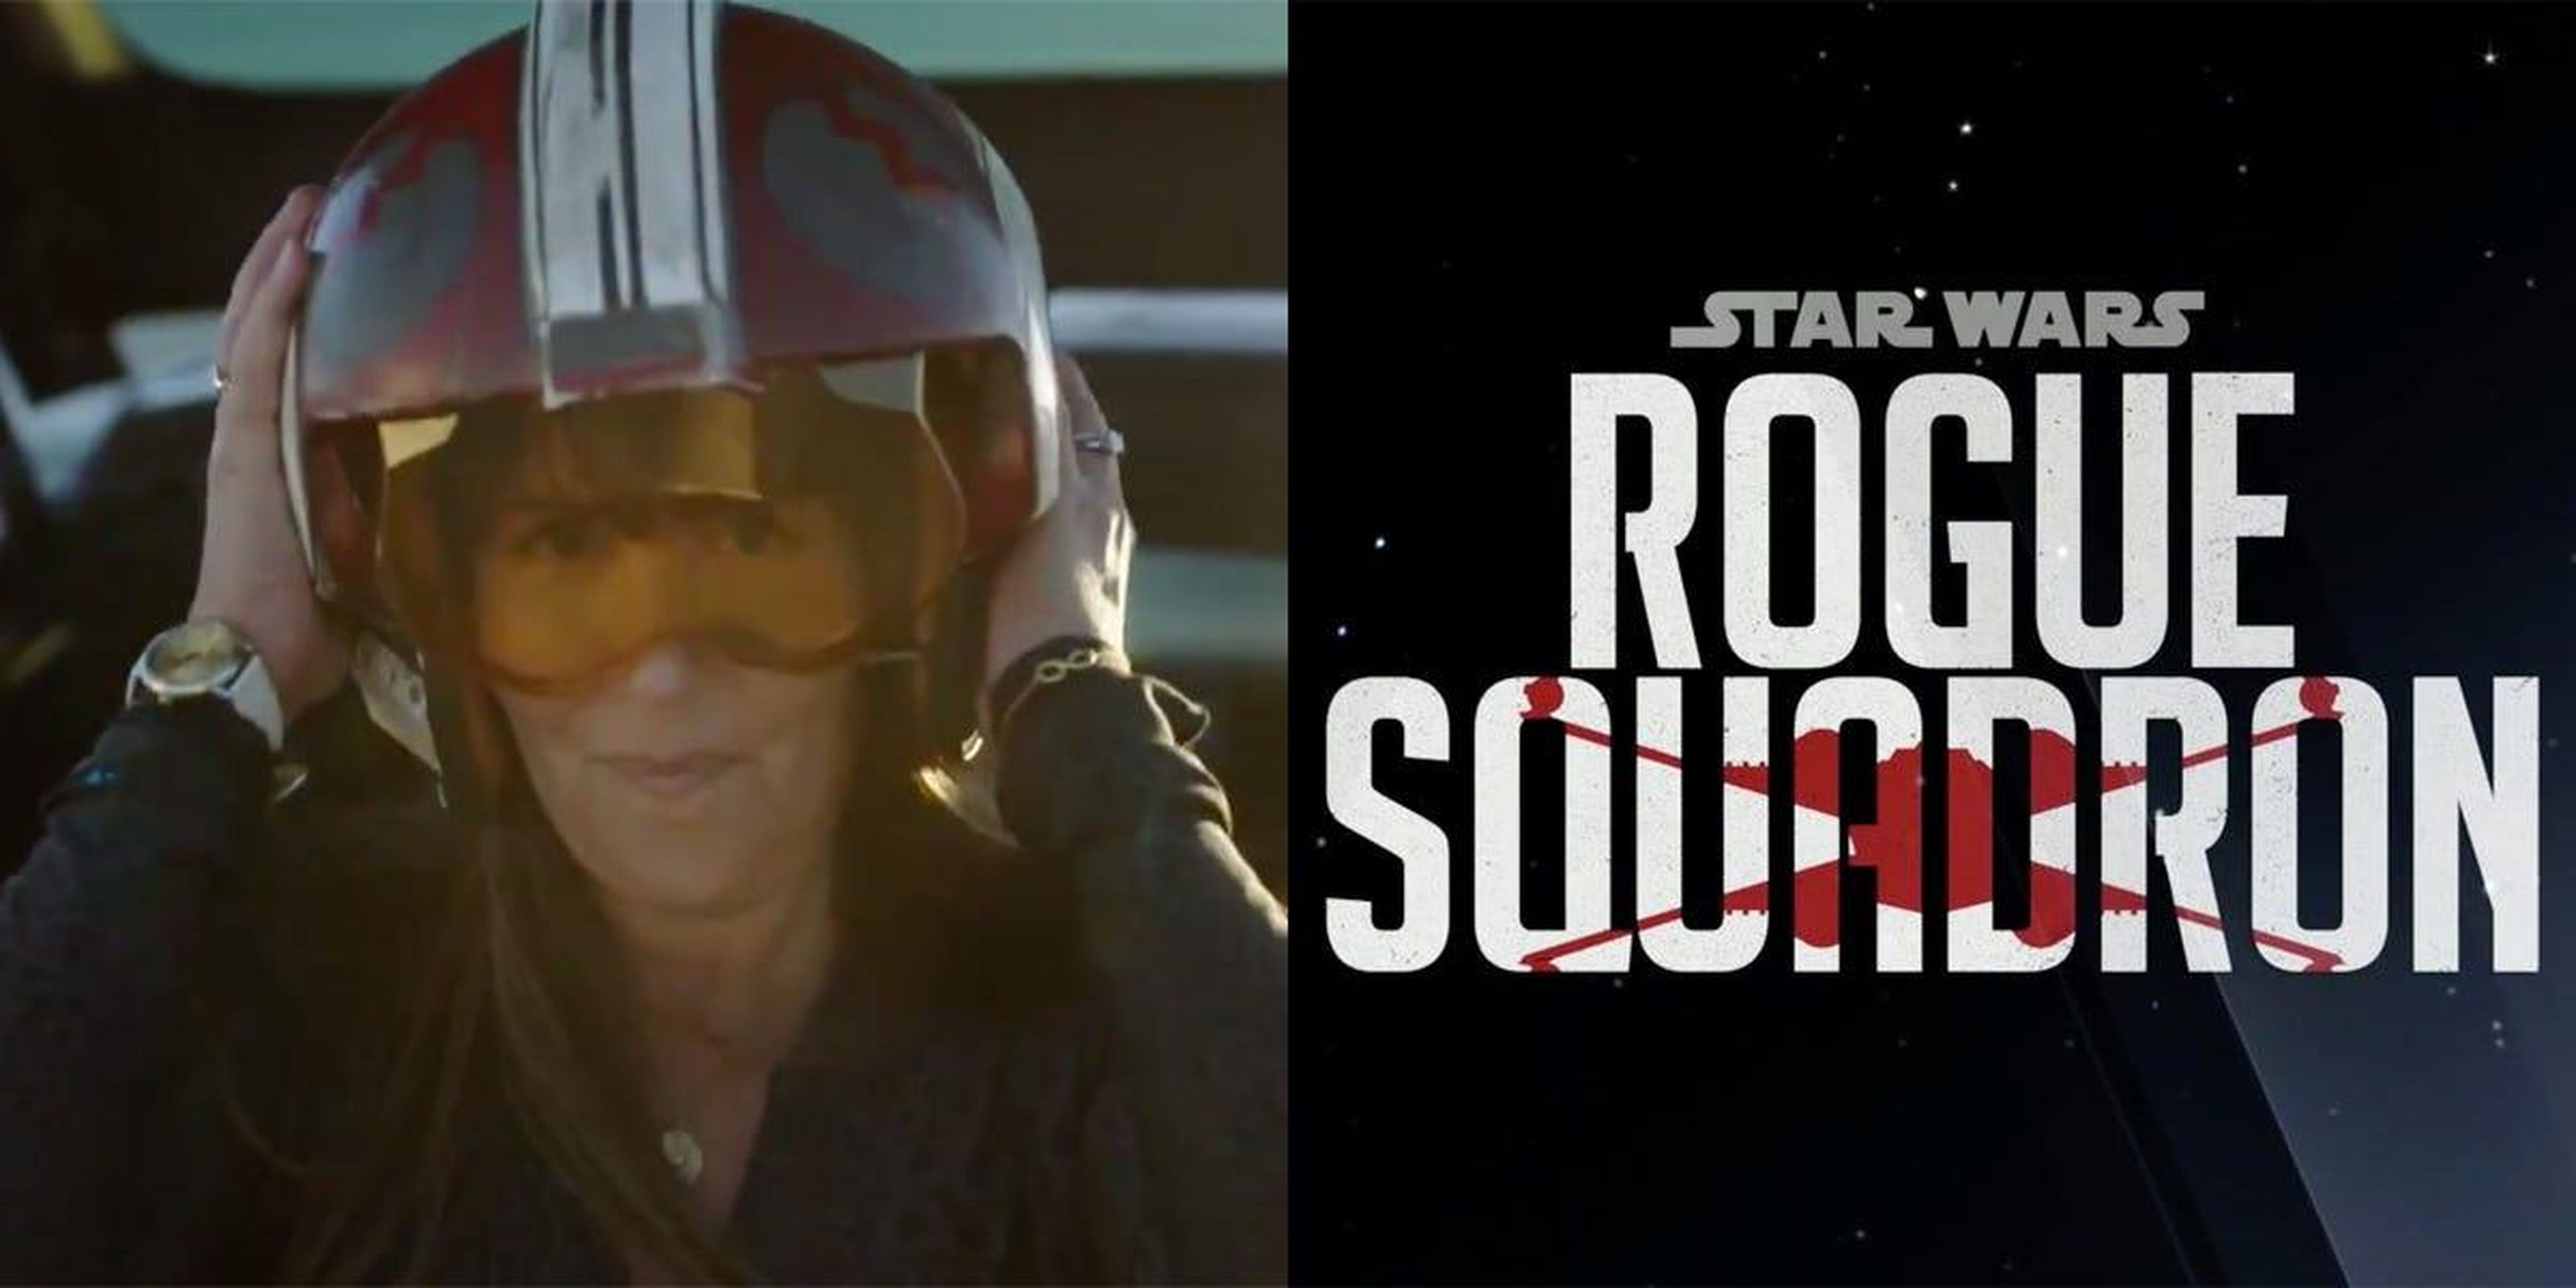 Kathleen Kennedy debuted the "Rogue Squadron" title at Disney's 2020 investor's day.